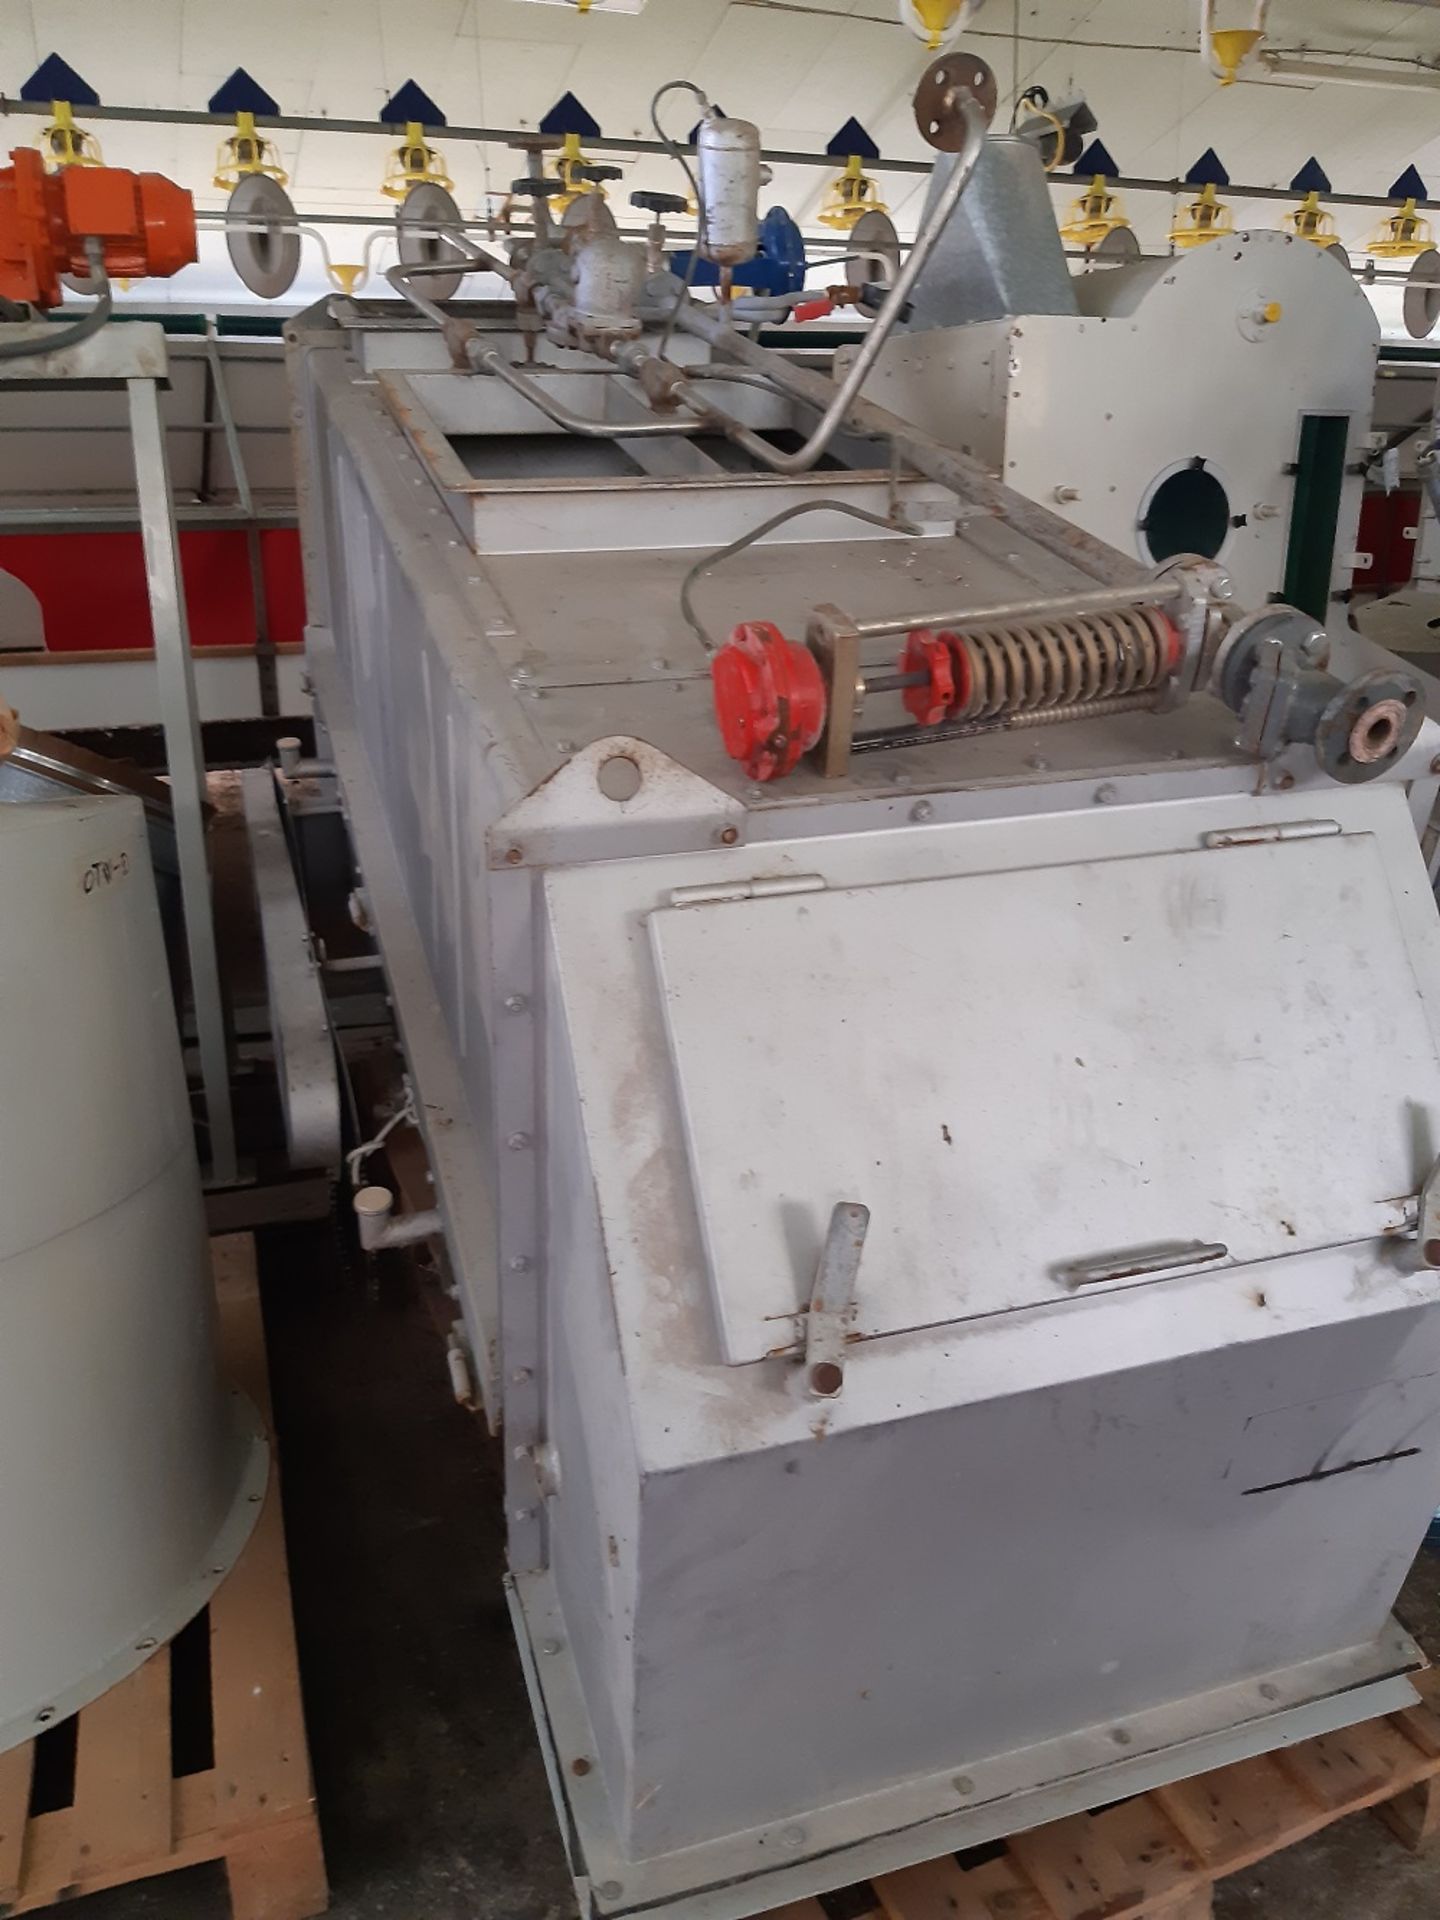 Bed Dryer - Buhler OTW 150 fluid bed dryer/cooler, new 1998 but never used. It can be used to dry or - Bild 2 aus 11